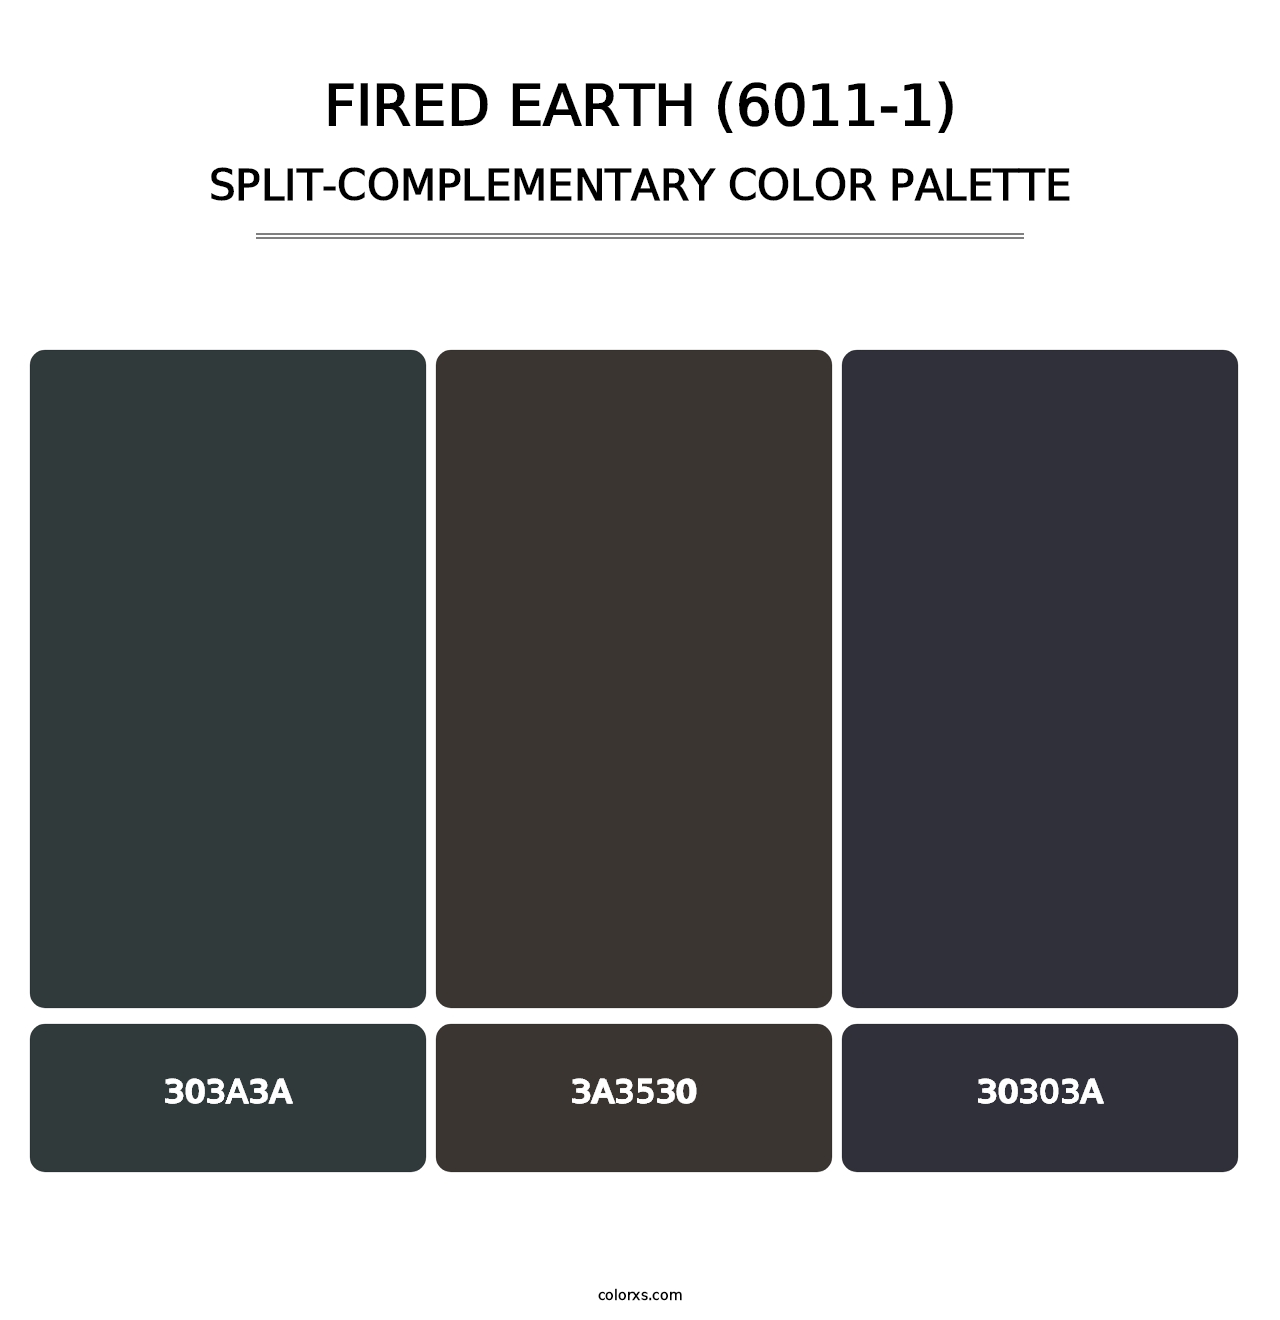 Fired Earth (6011-1) - Split-Complementary Color Palette